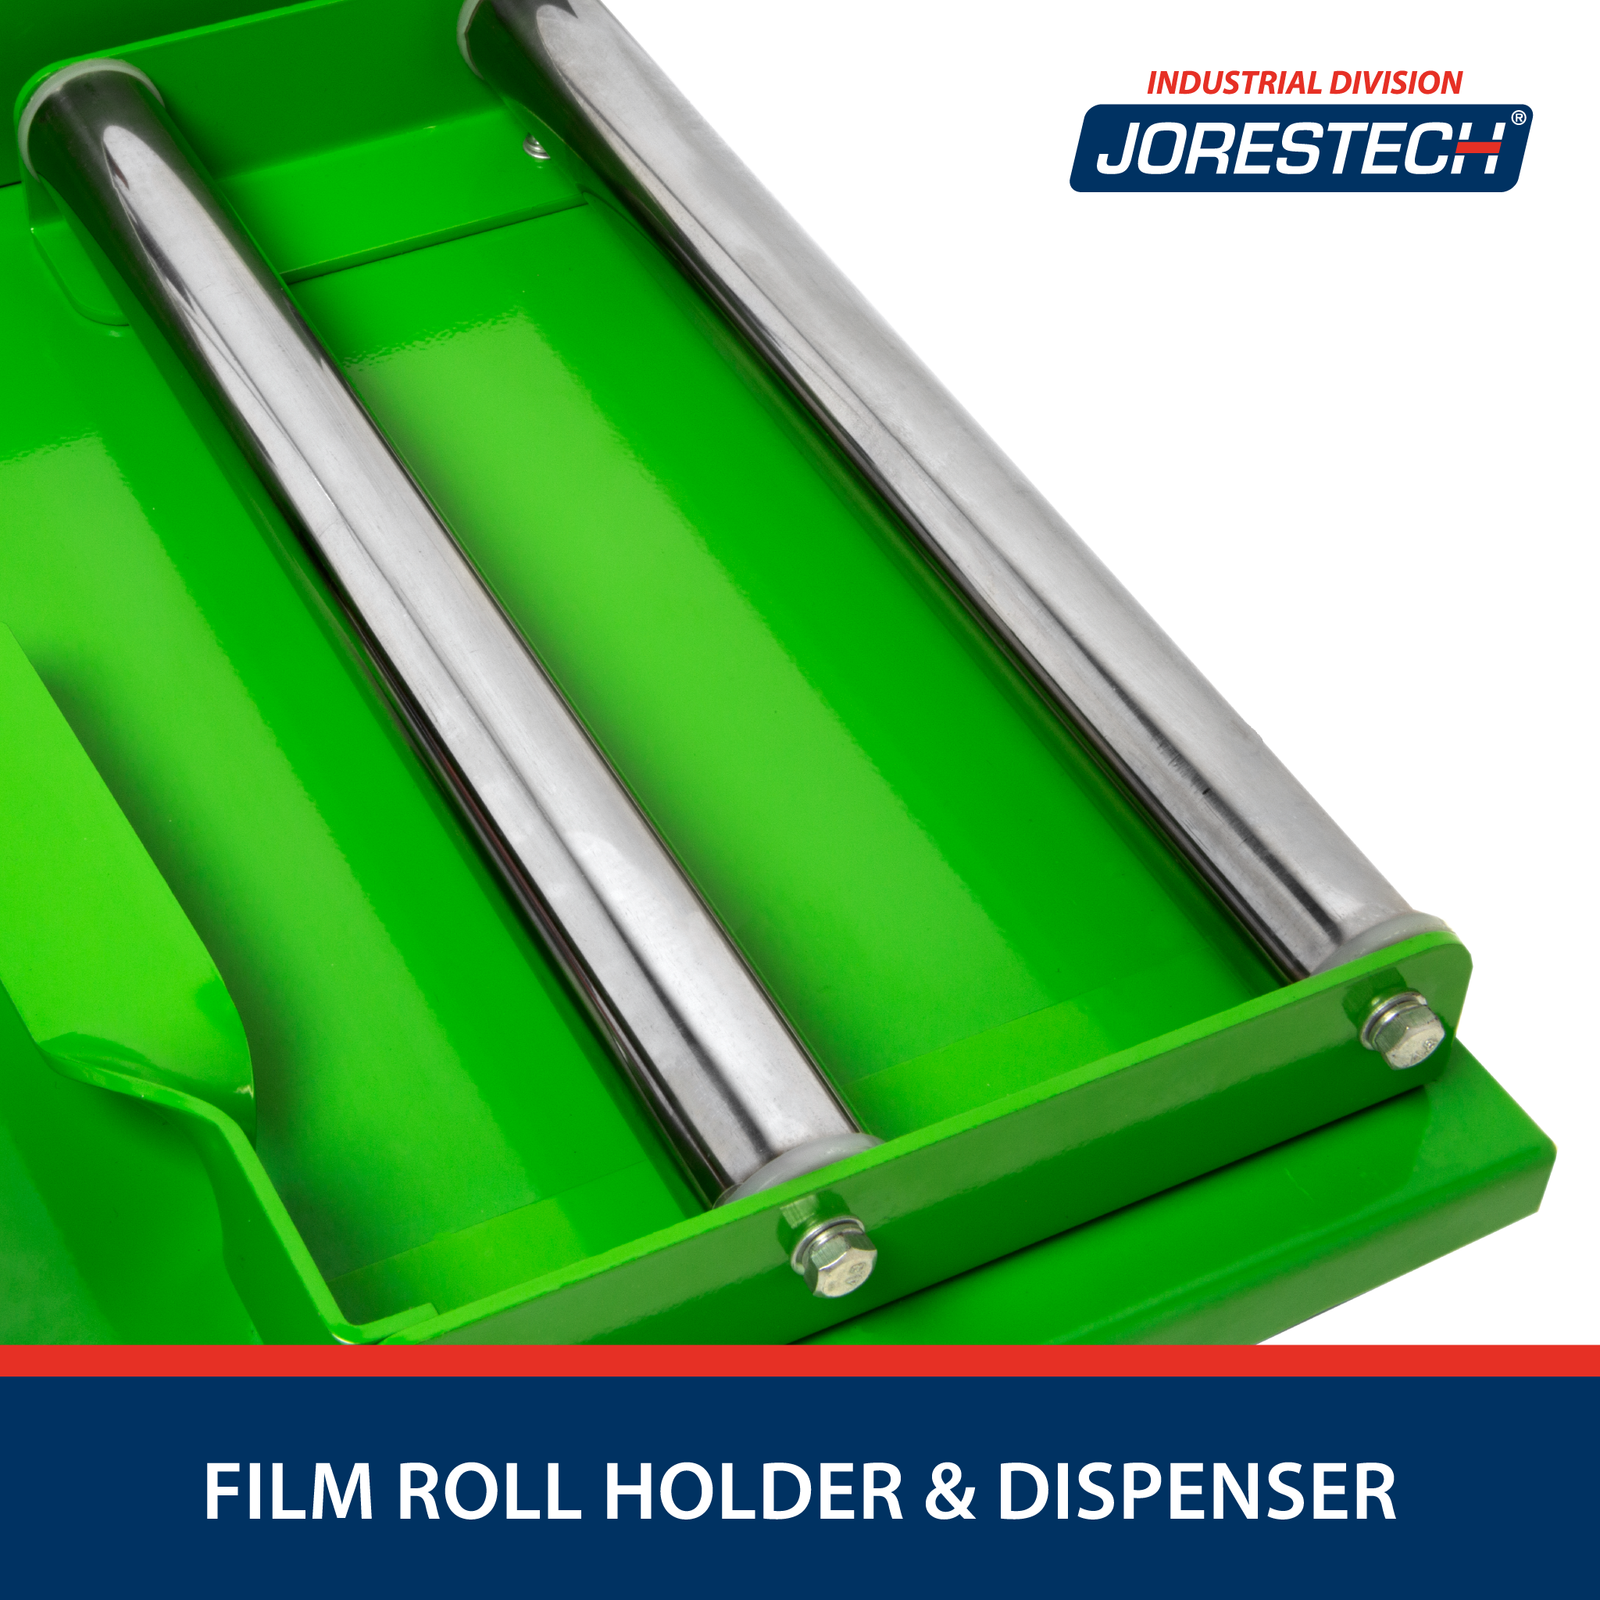 Close-up of the shrink roll holder bars on a shrink wrapping film dispenser and sealer machine. Text on the bottom reads “Film Roll Holder and Dispenser”.